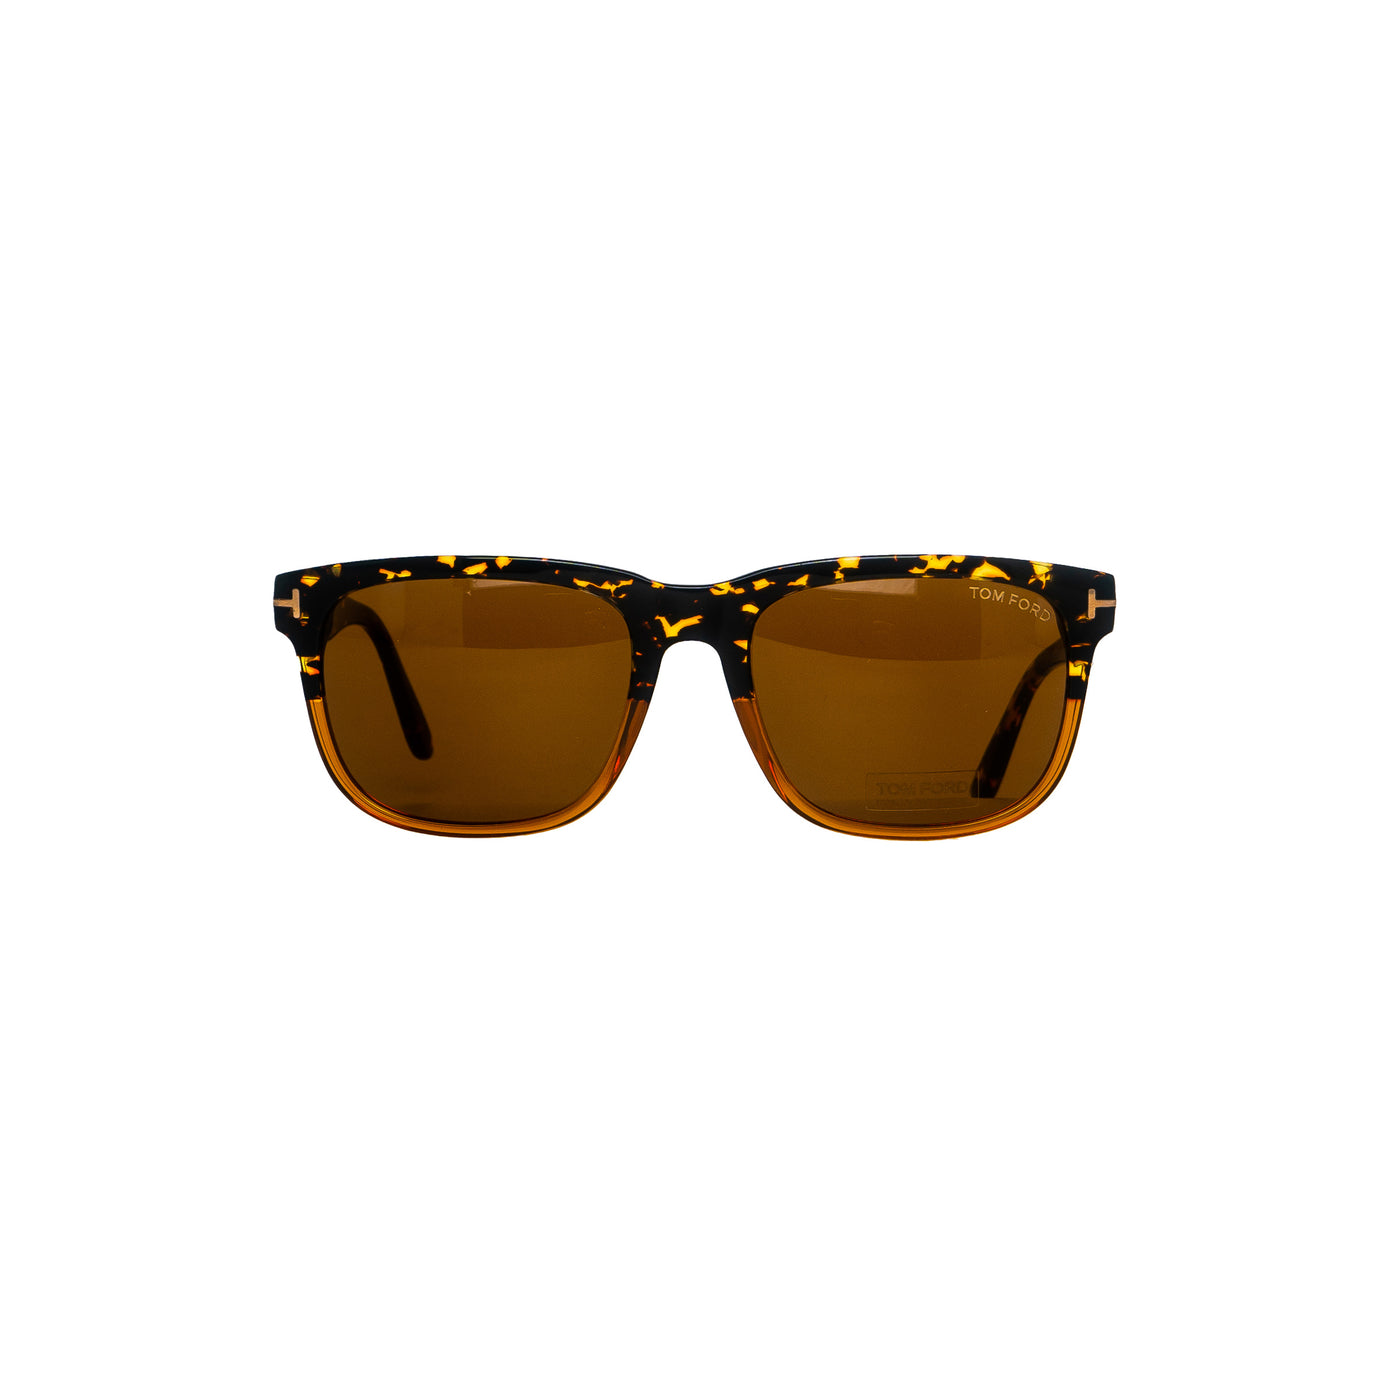 Tom Ford Sunglasses | FT077556E56 - Vision Express Optical Philippines